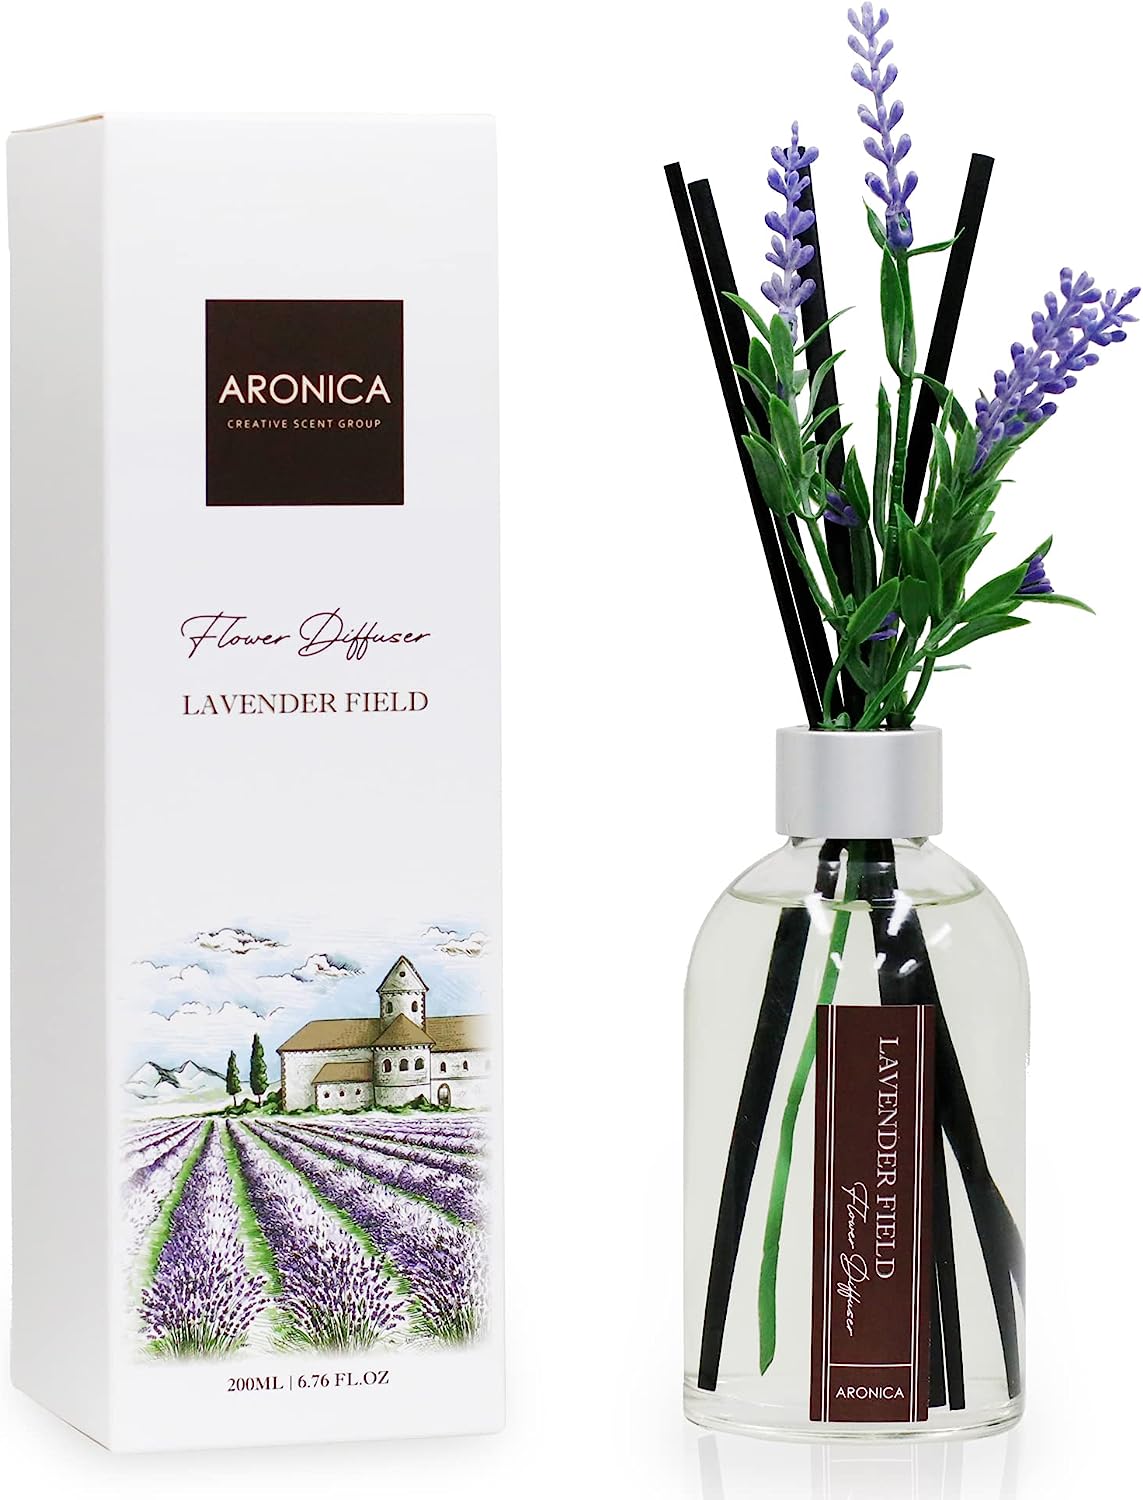 Lavender Field Flower Reed Diffuser - Aromatherapy Scented Oil Diffuser for Home and Office Decor, Relaxing Aesthetic Fragrance, Bathroom Essential Oil Diffusers Set, Elegant Desk Air Fresheners, 6.76 oz